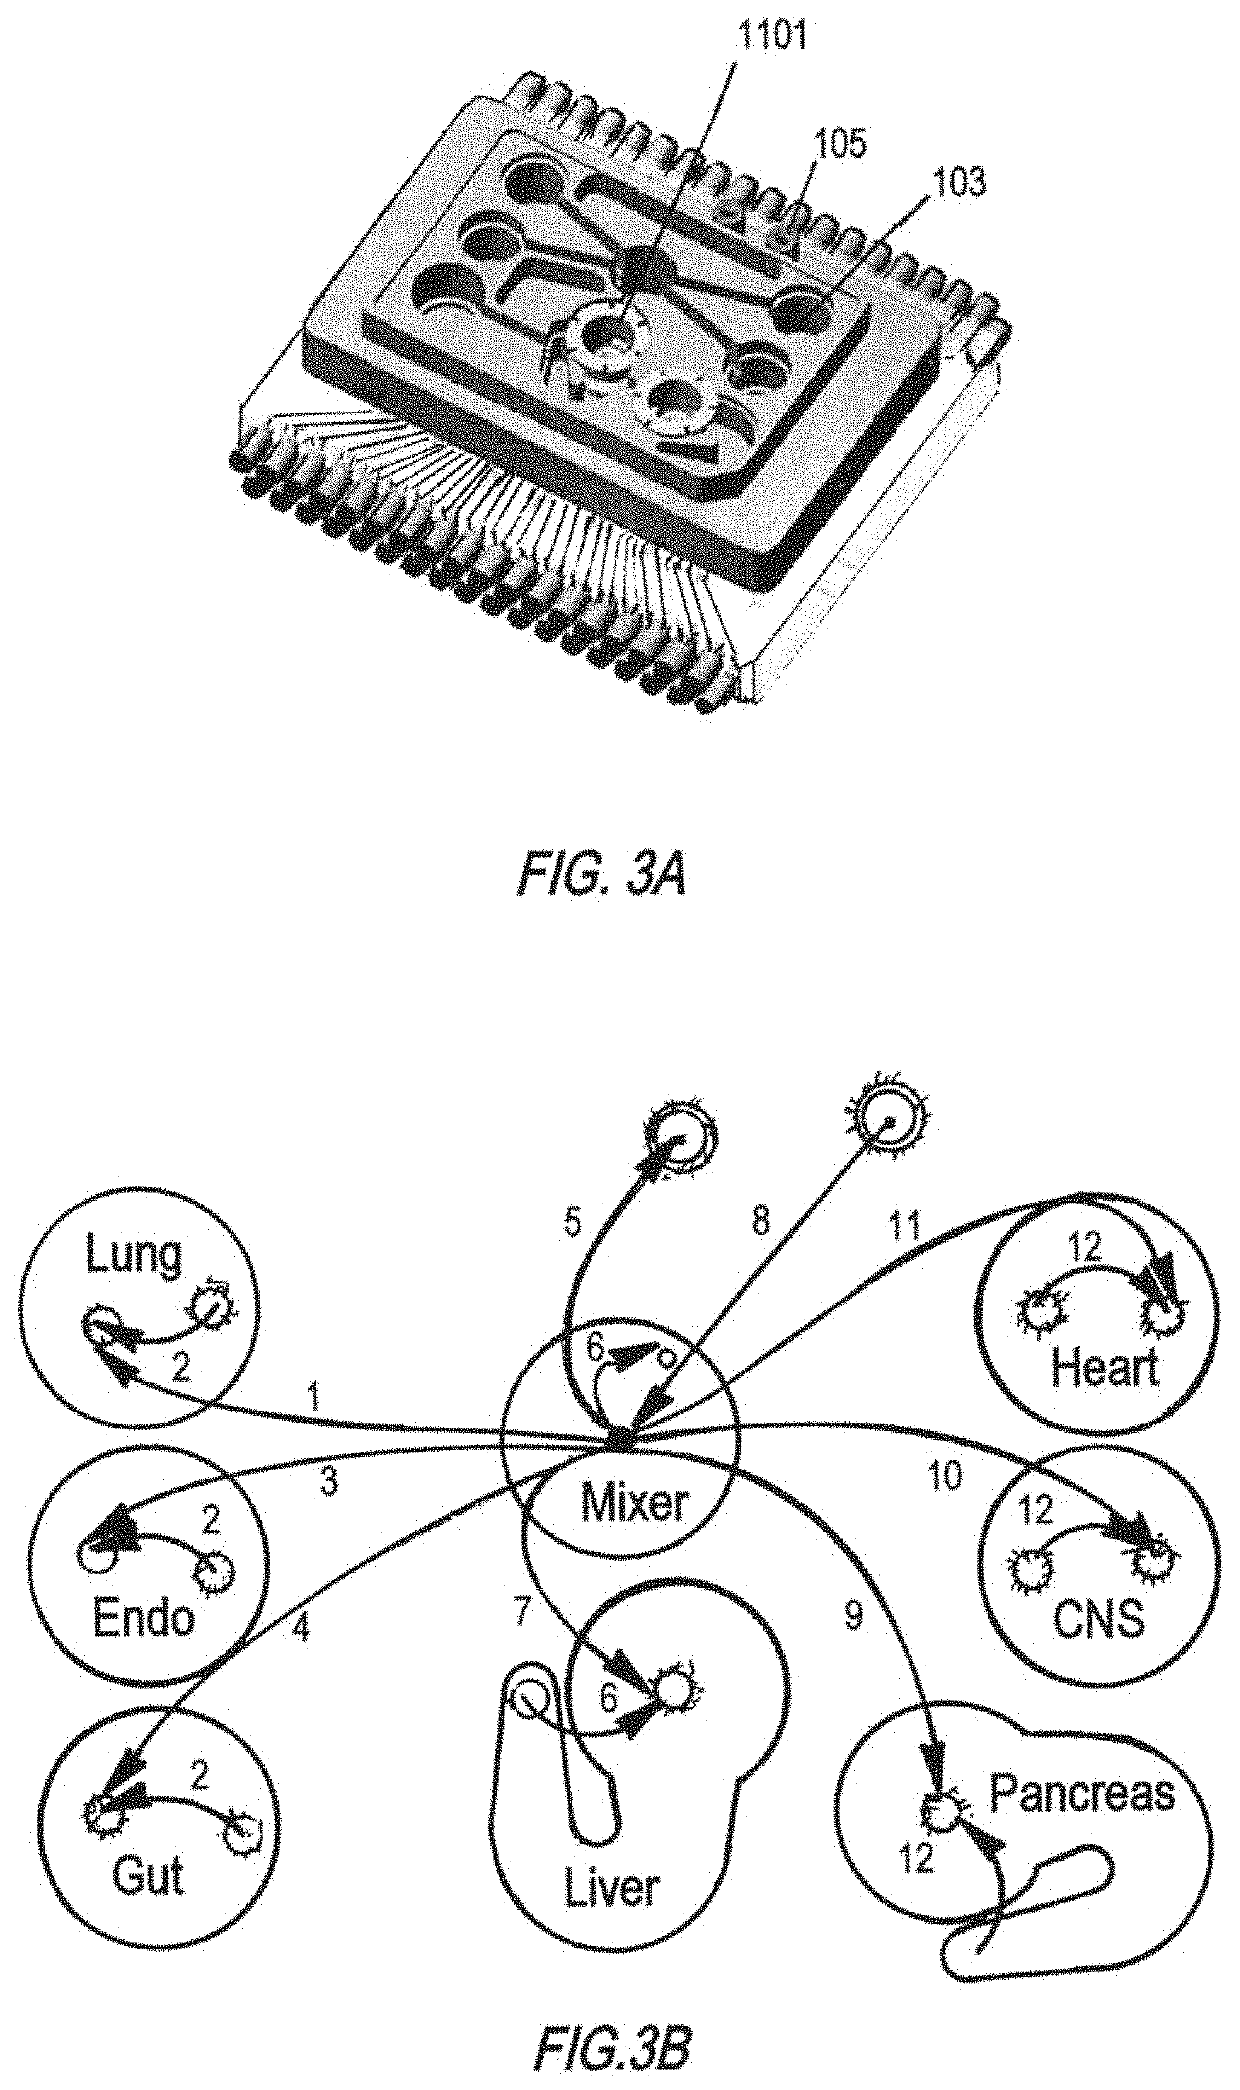 Modular organ microphysiological system with integrated pumping, leveling, and sensing